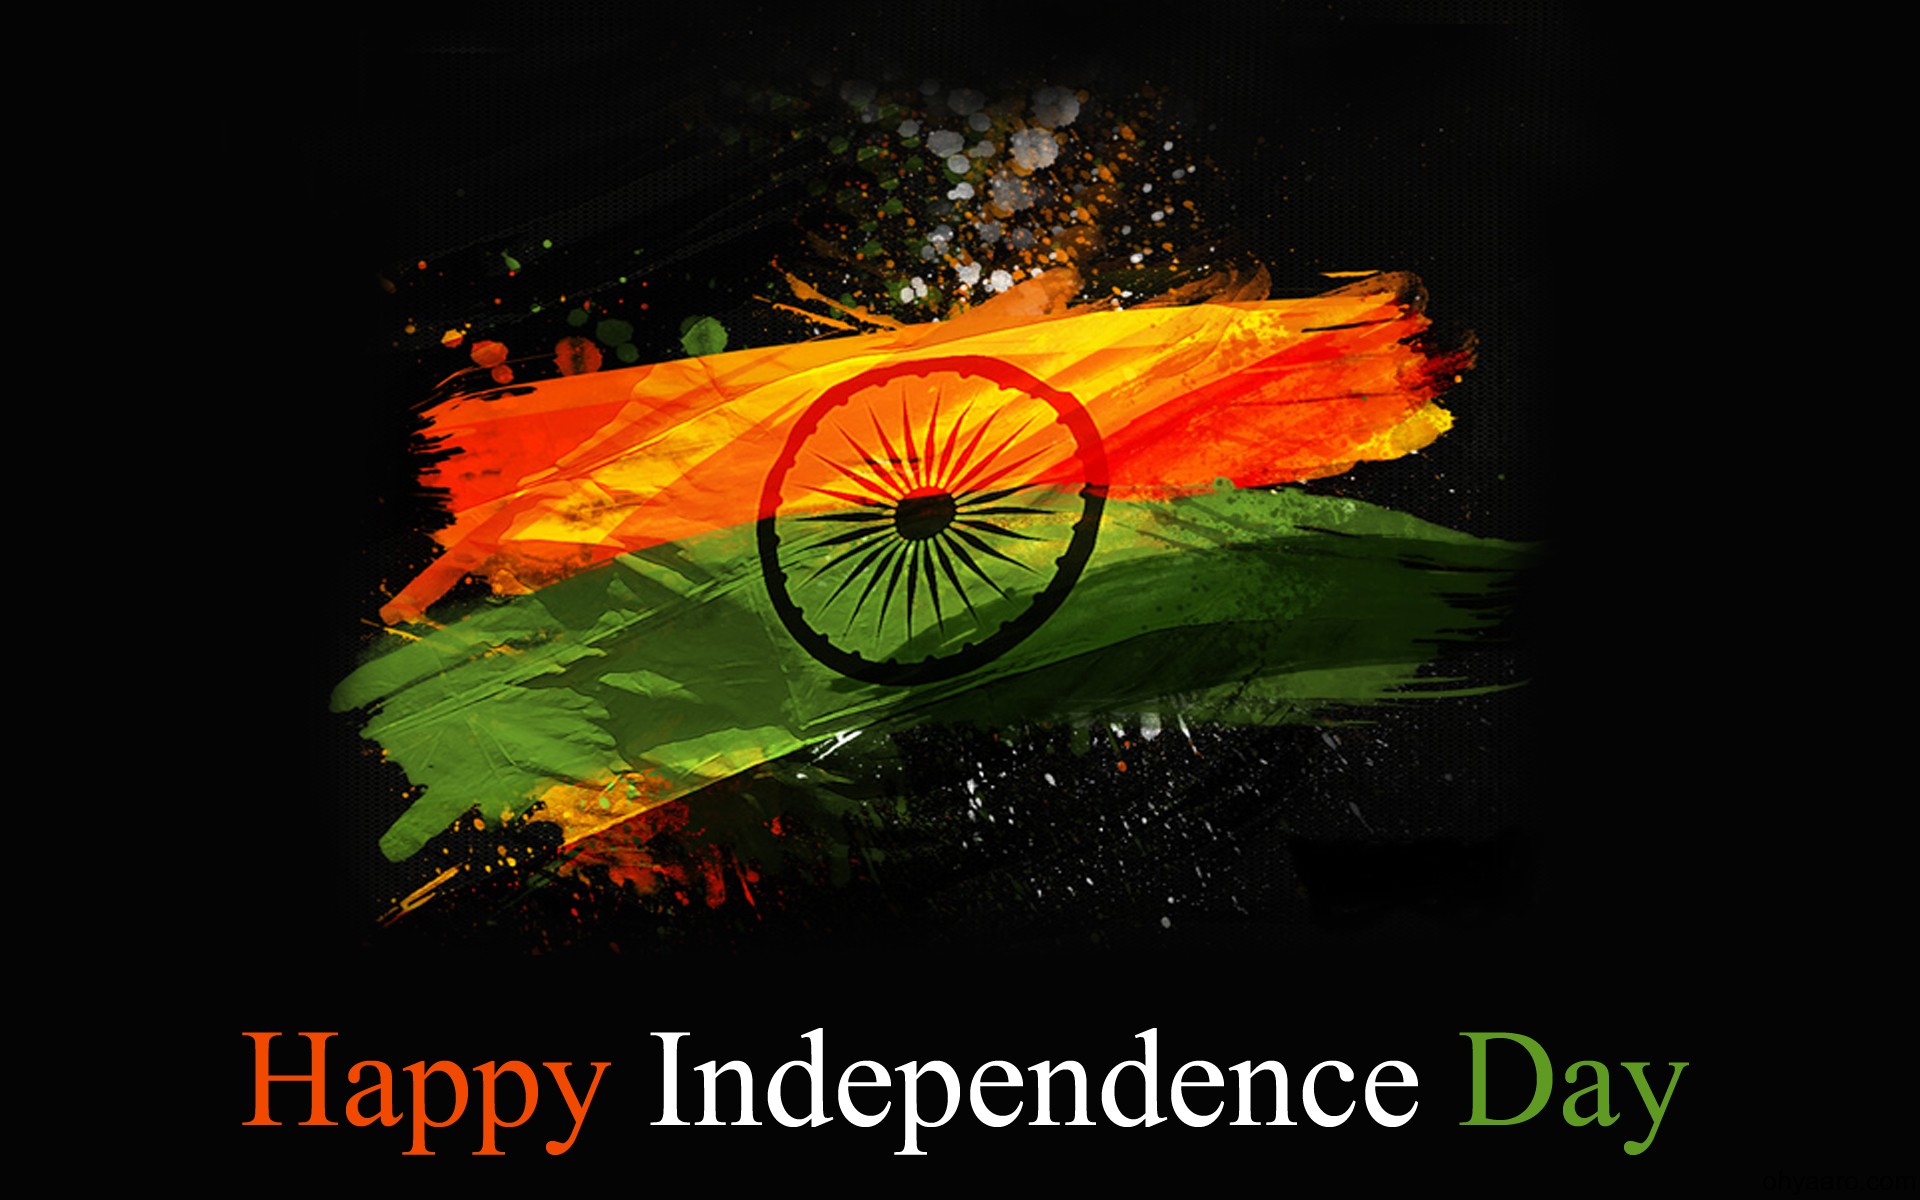 Independence day image